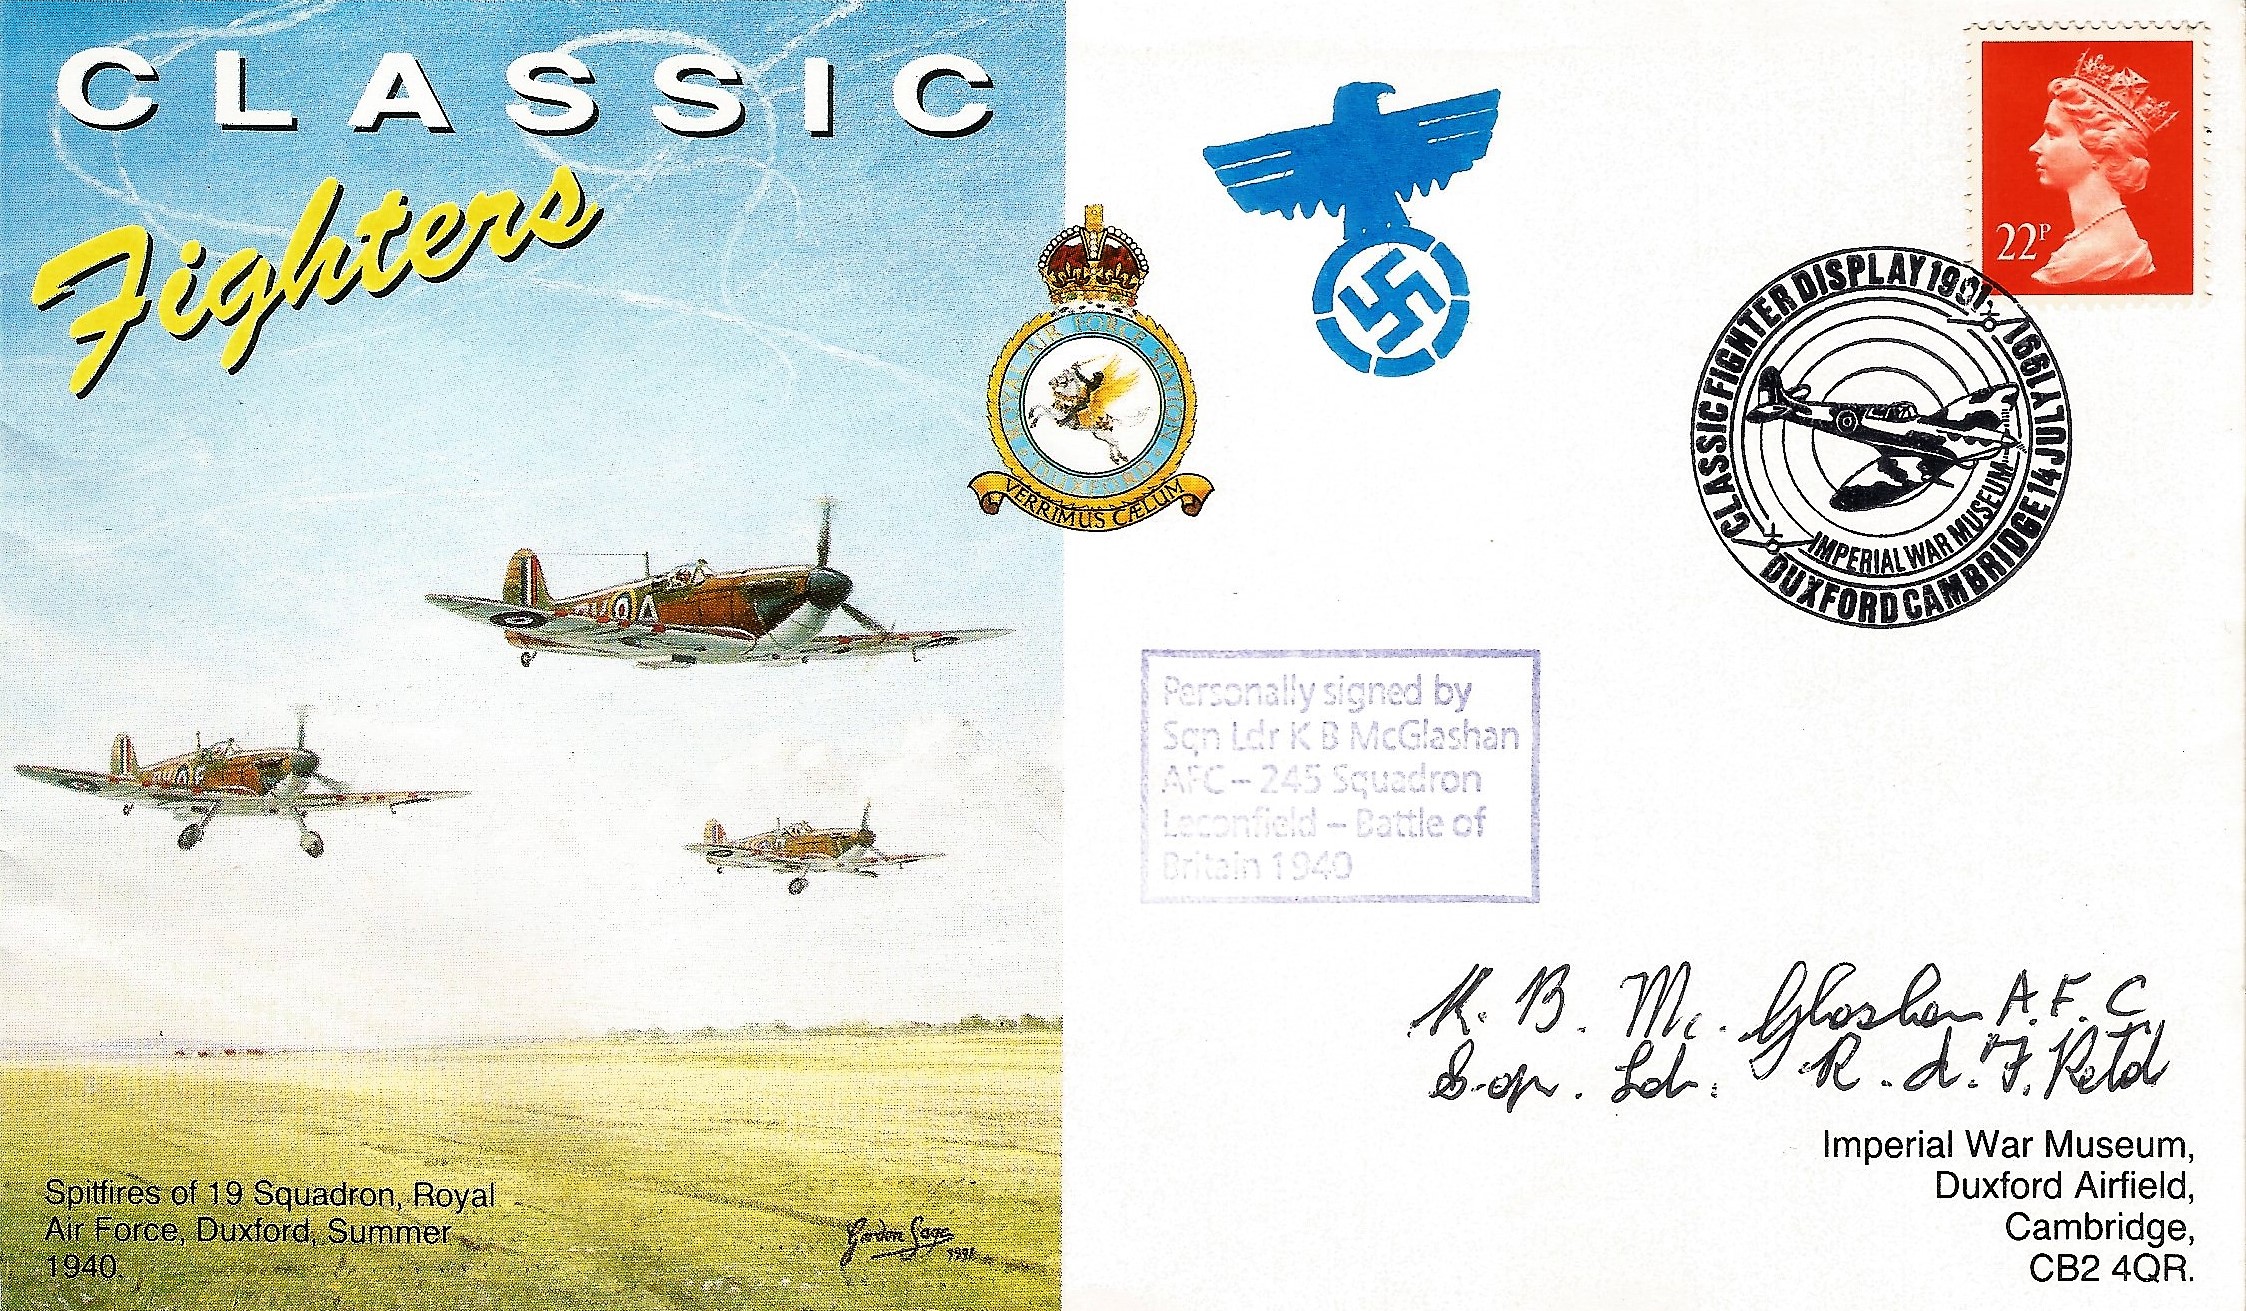 WW2 Sqdn Ldr K B McGlashan AFC Hand signed Classic Fighters FDC. Postmarked Classic Fighter